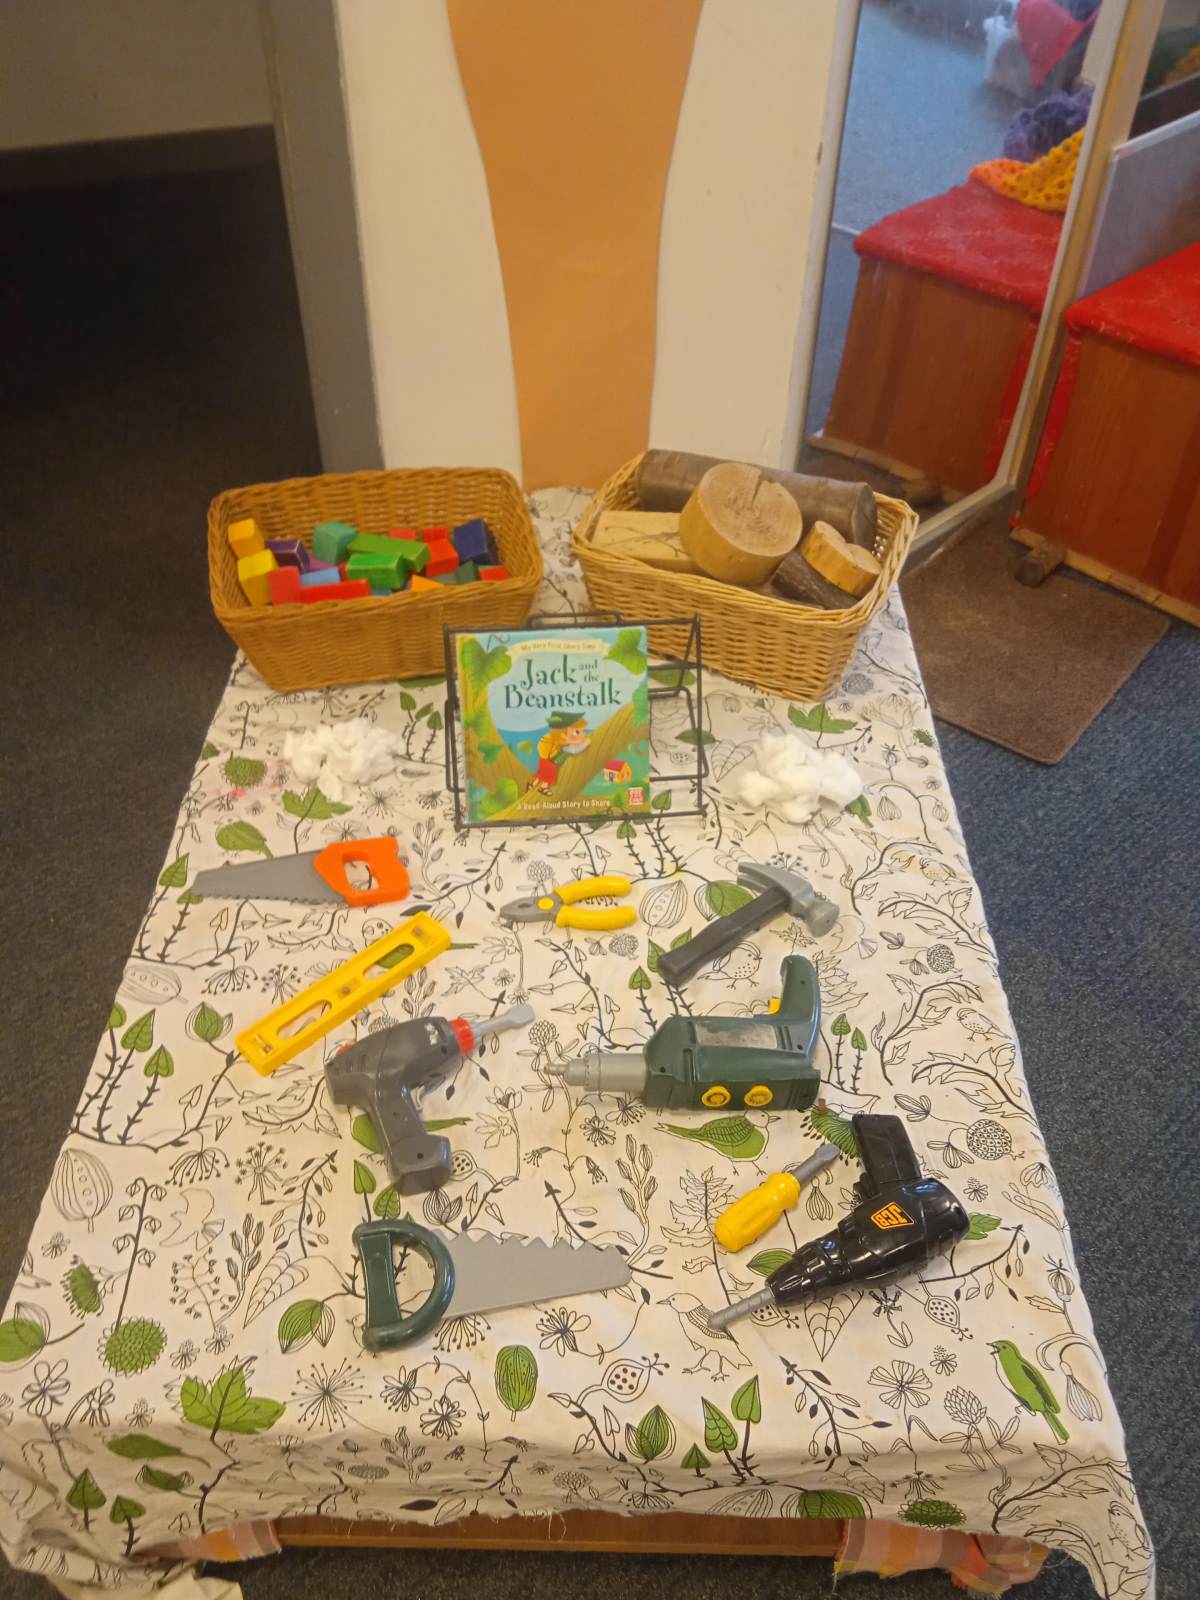 Tools and blocks for castle building